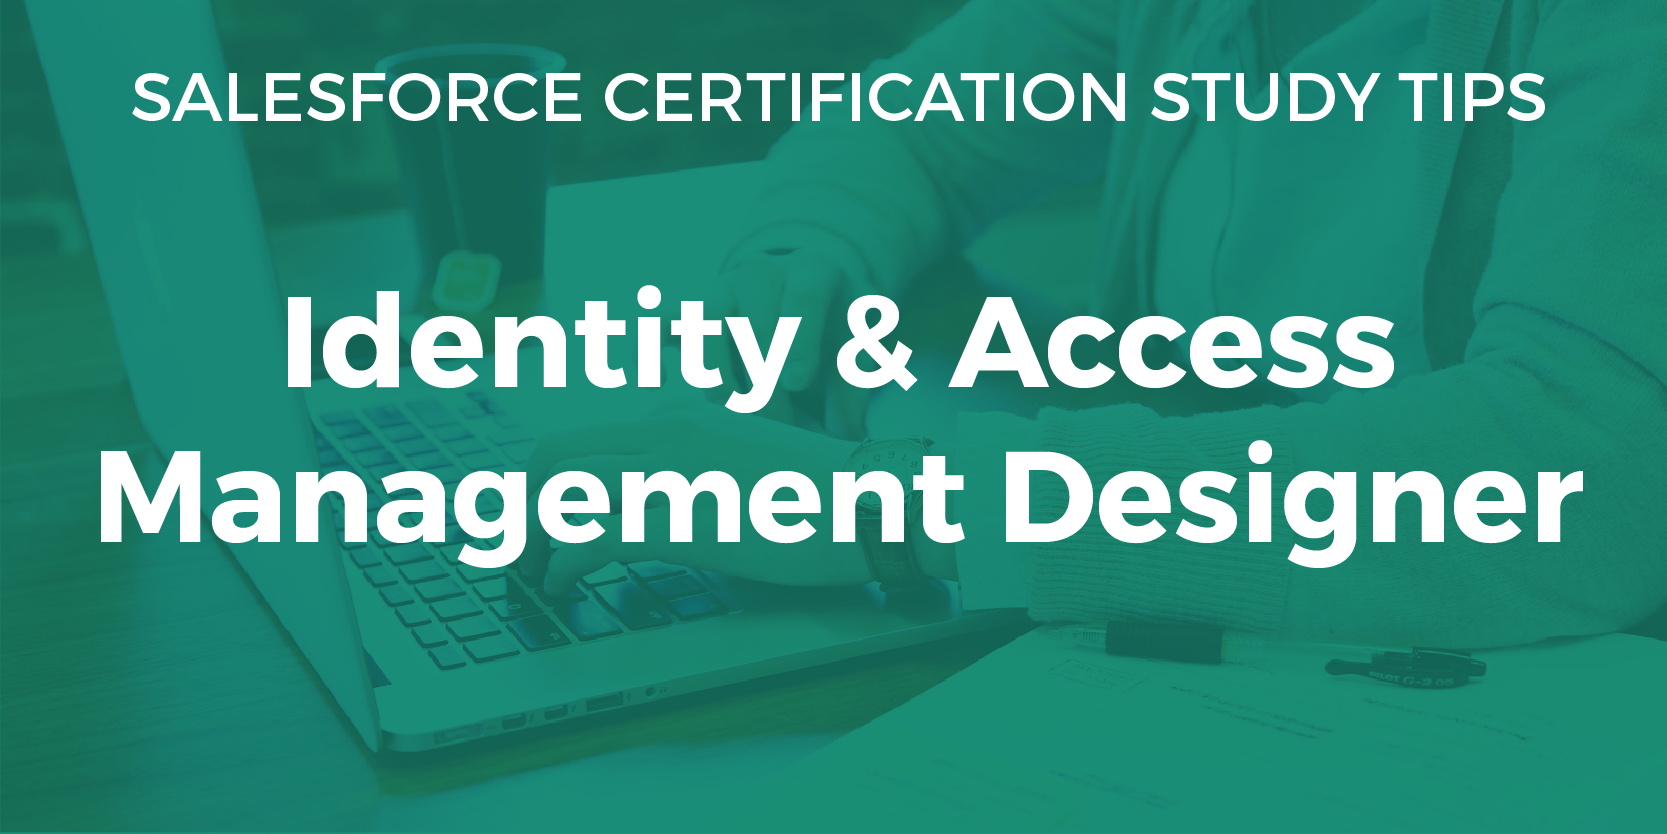 Identity and Access Management Designer Study Guide - Salesforce Chris